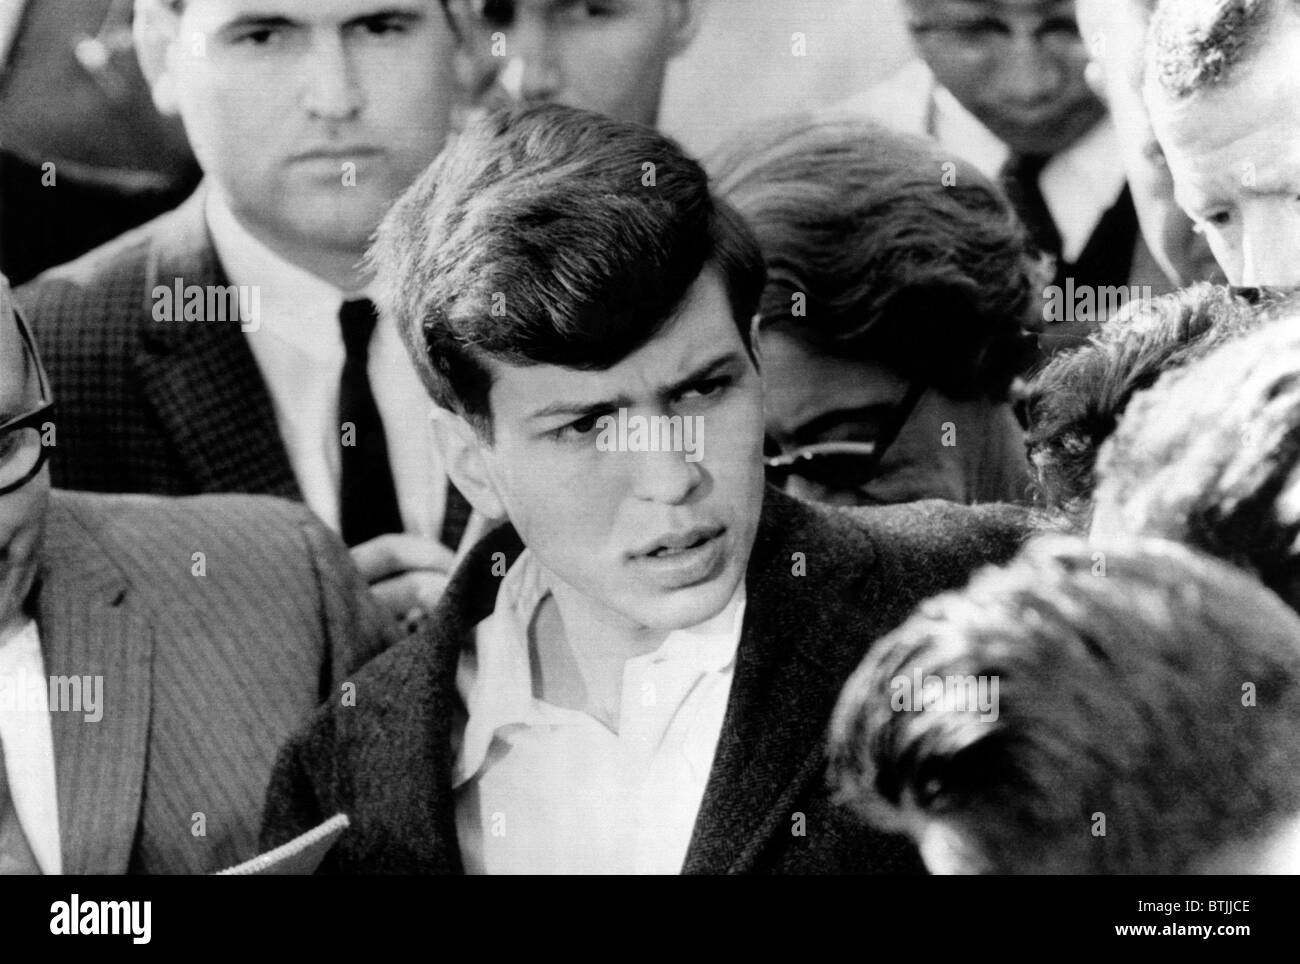 American singer and conductor Frank Sinatra Jr., after his father (Frank Sinatra) paid a ransom of 240,000 dollars to kidnappers Stock Photo